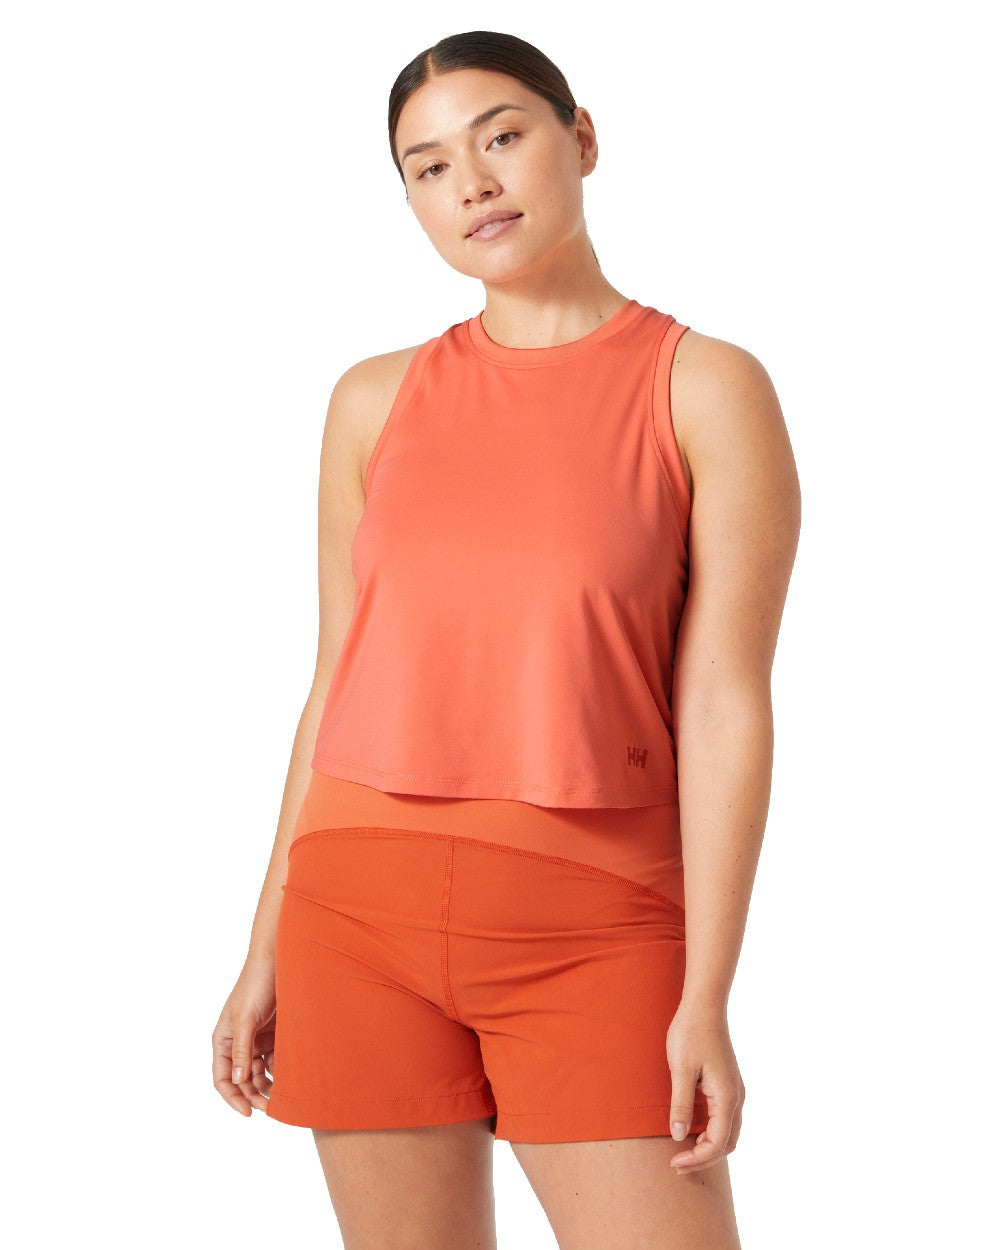 Peach Echo coloured Helly Hansen Womens Ocean Cropped Tank Top on white background 